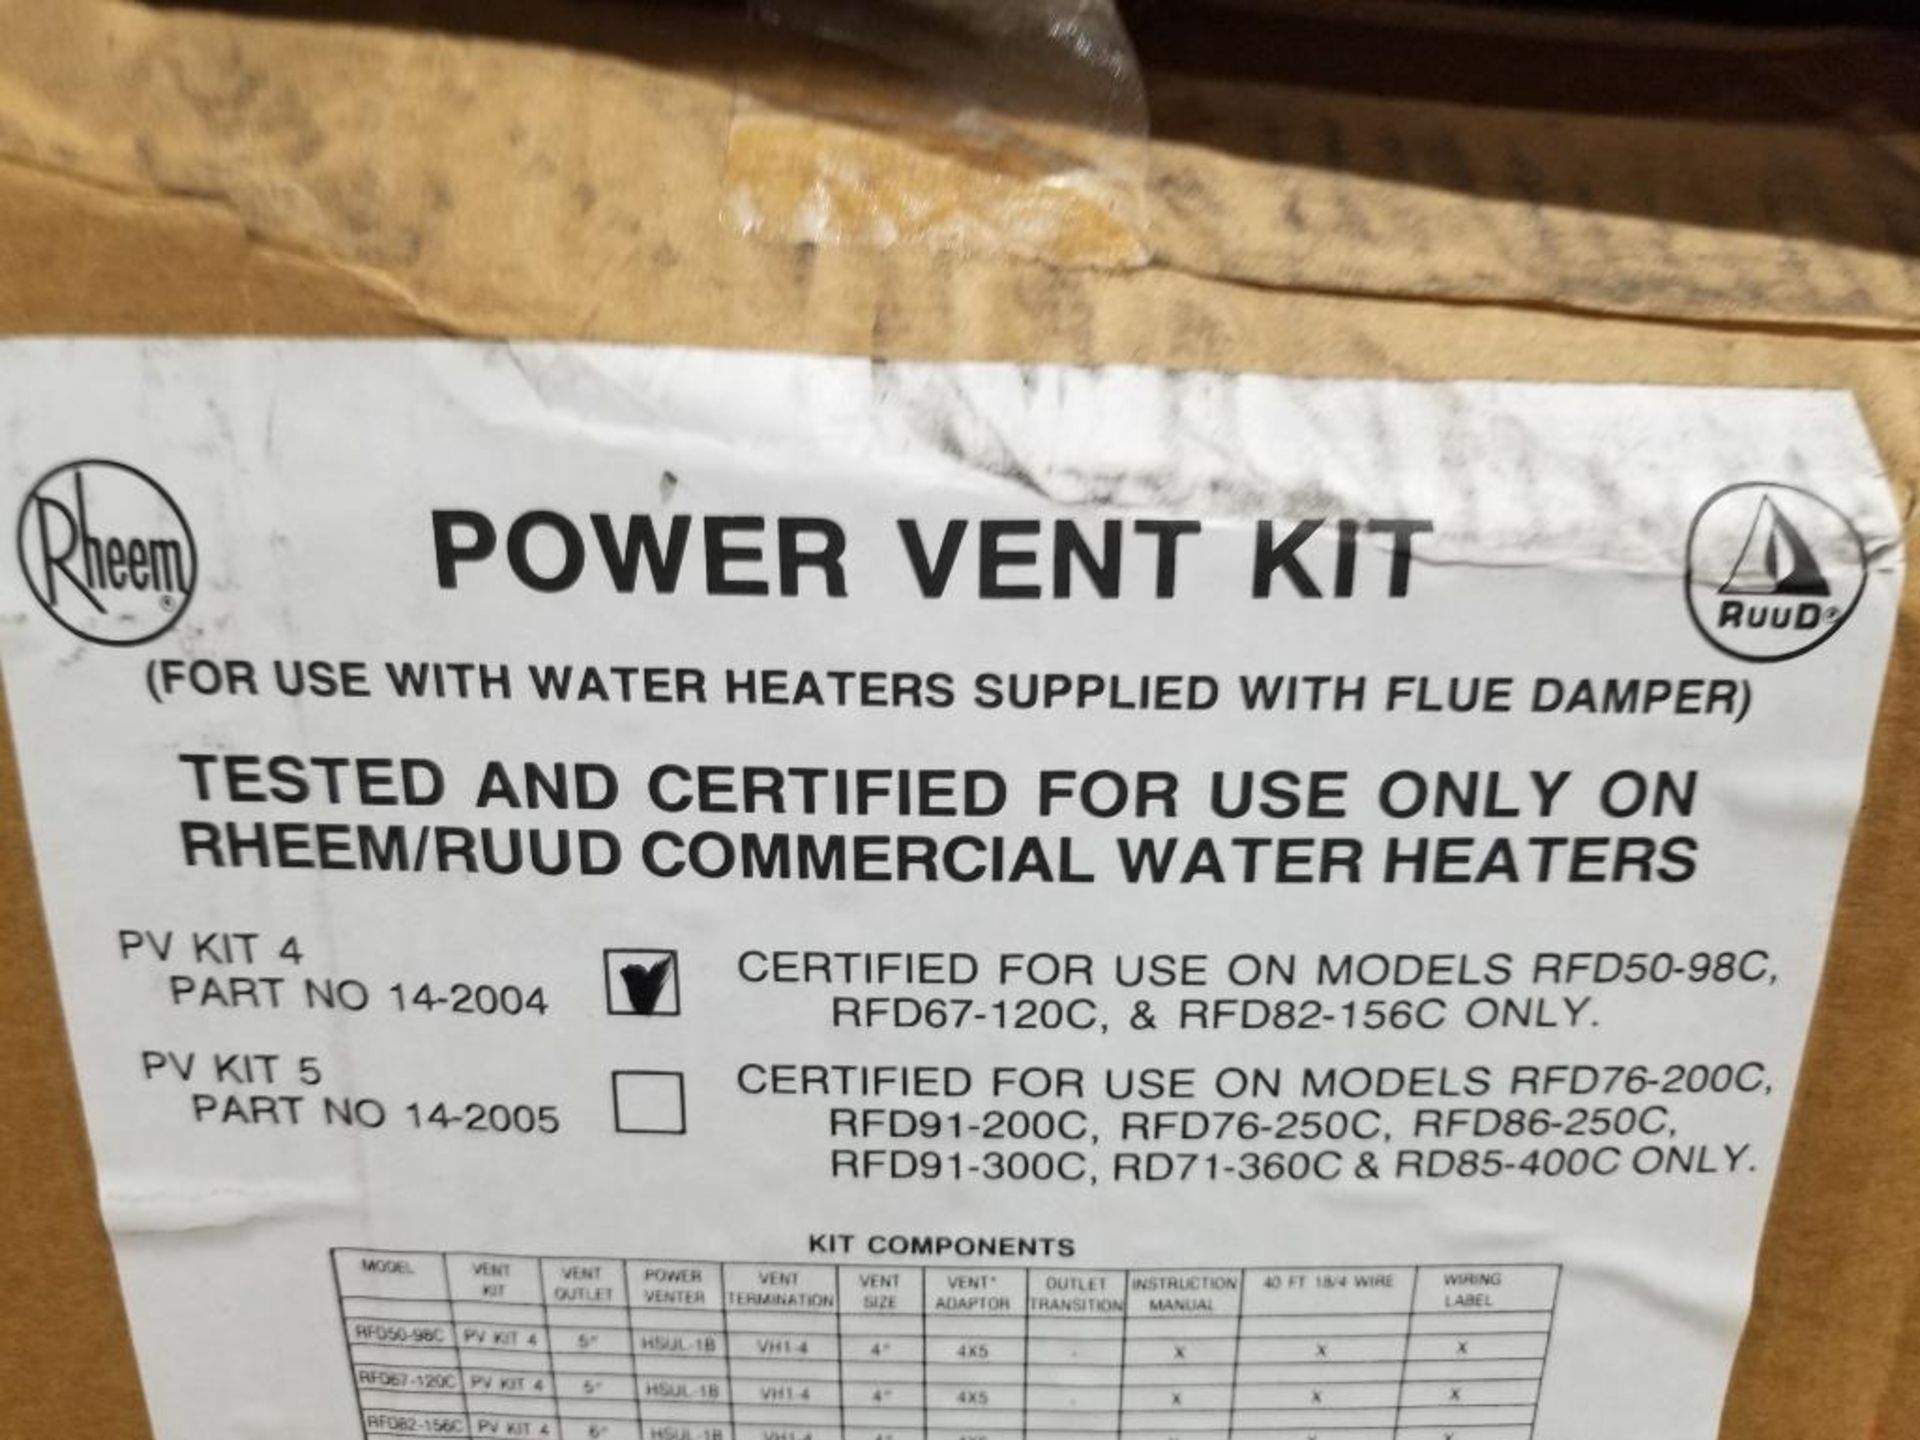 Qty 2 - Rheem commercial power venter. Part number HSUL-1B. - Image 2 of 3